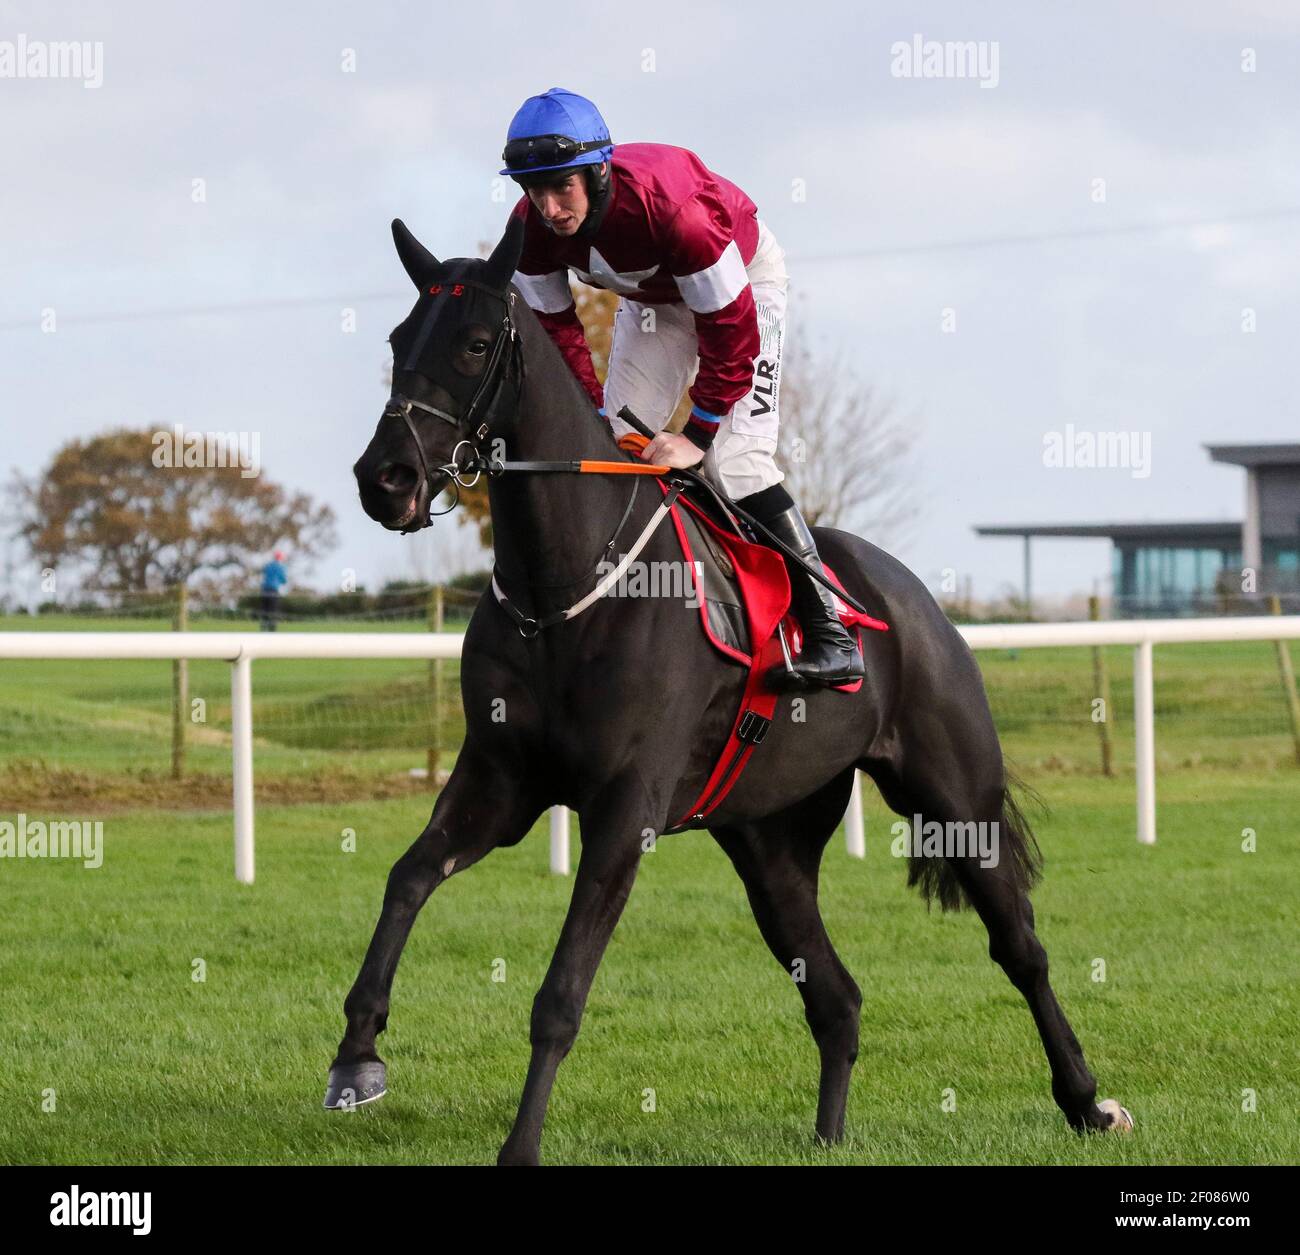 Horse racing UK and Ireland.Down Royal Racecourse, Lisburn, Northern Ireland. 31 Oct 2020. National Hunt Meeting. The Ladbrokes Festival of Racing (Day 2) feature race was the Ladbrokes Champion Chase (Grade 1) with €75,000 for the winner and held behind closed doors. Racehorse Delta Work ridden by Jack Kennedy and trained by Gordon Elliott. Stock Photo